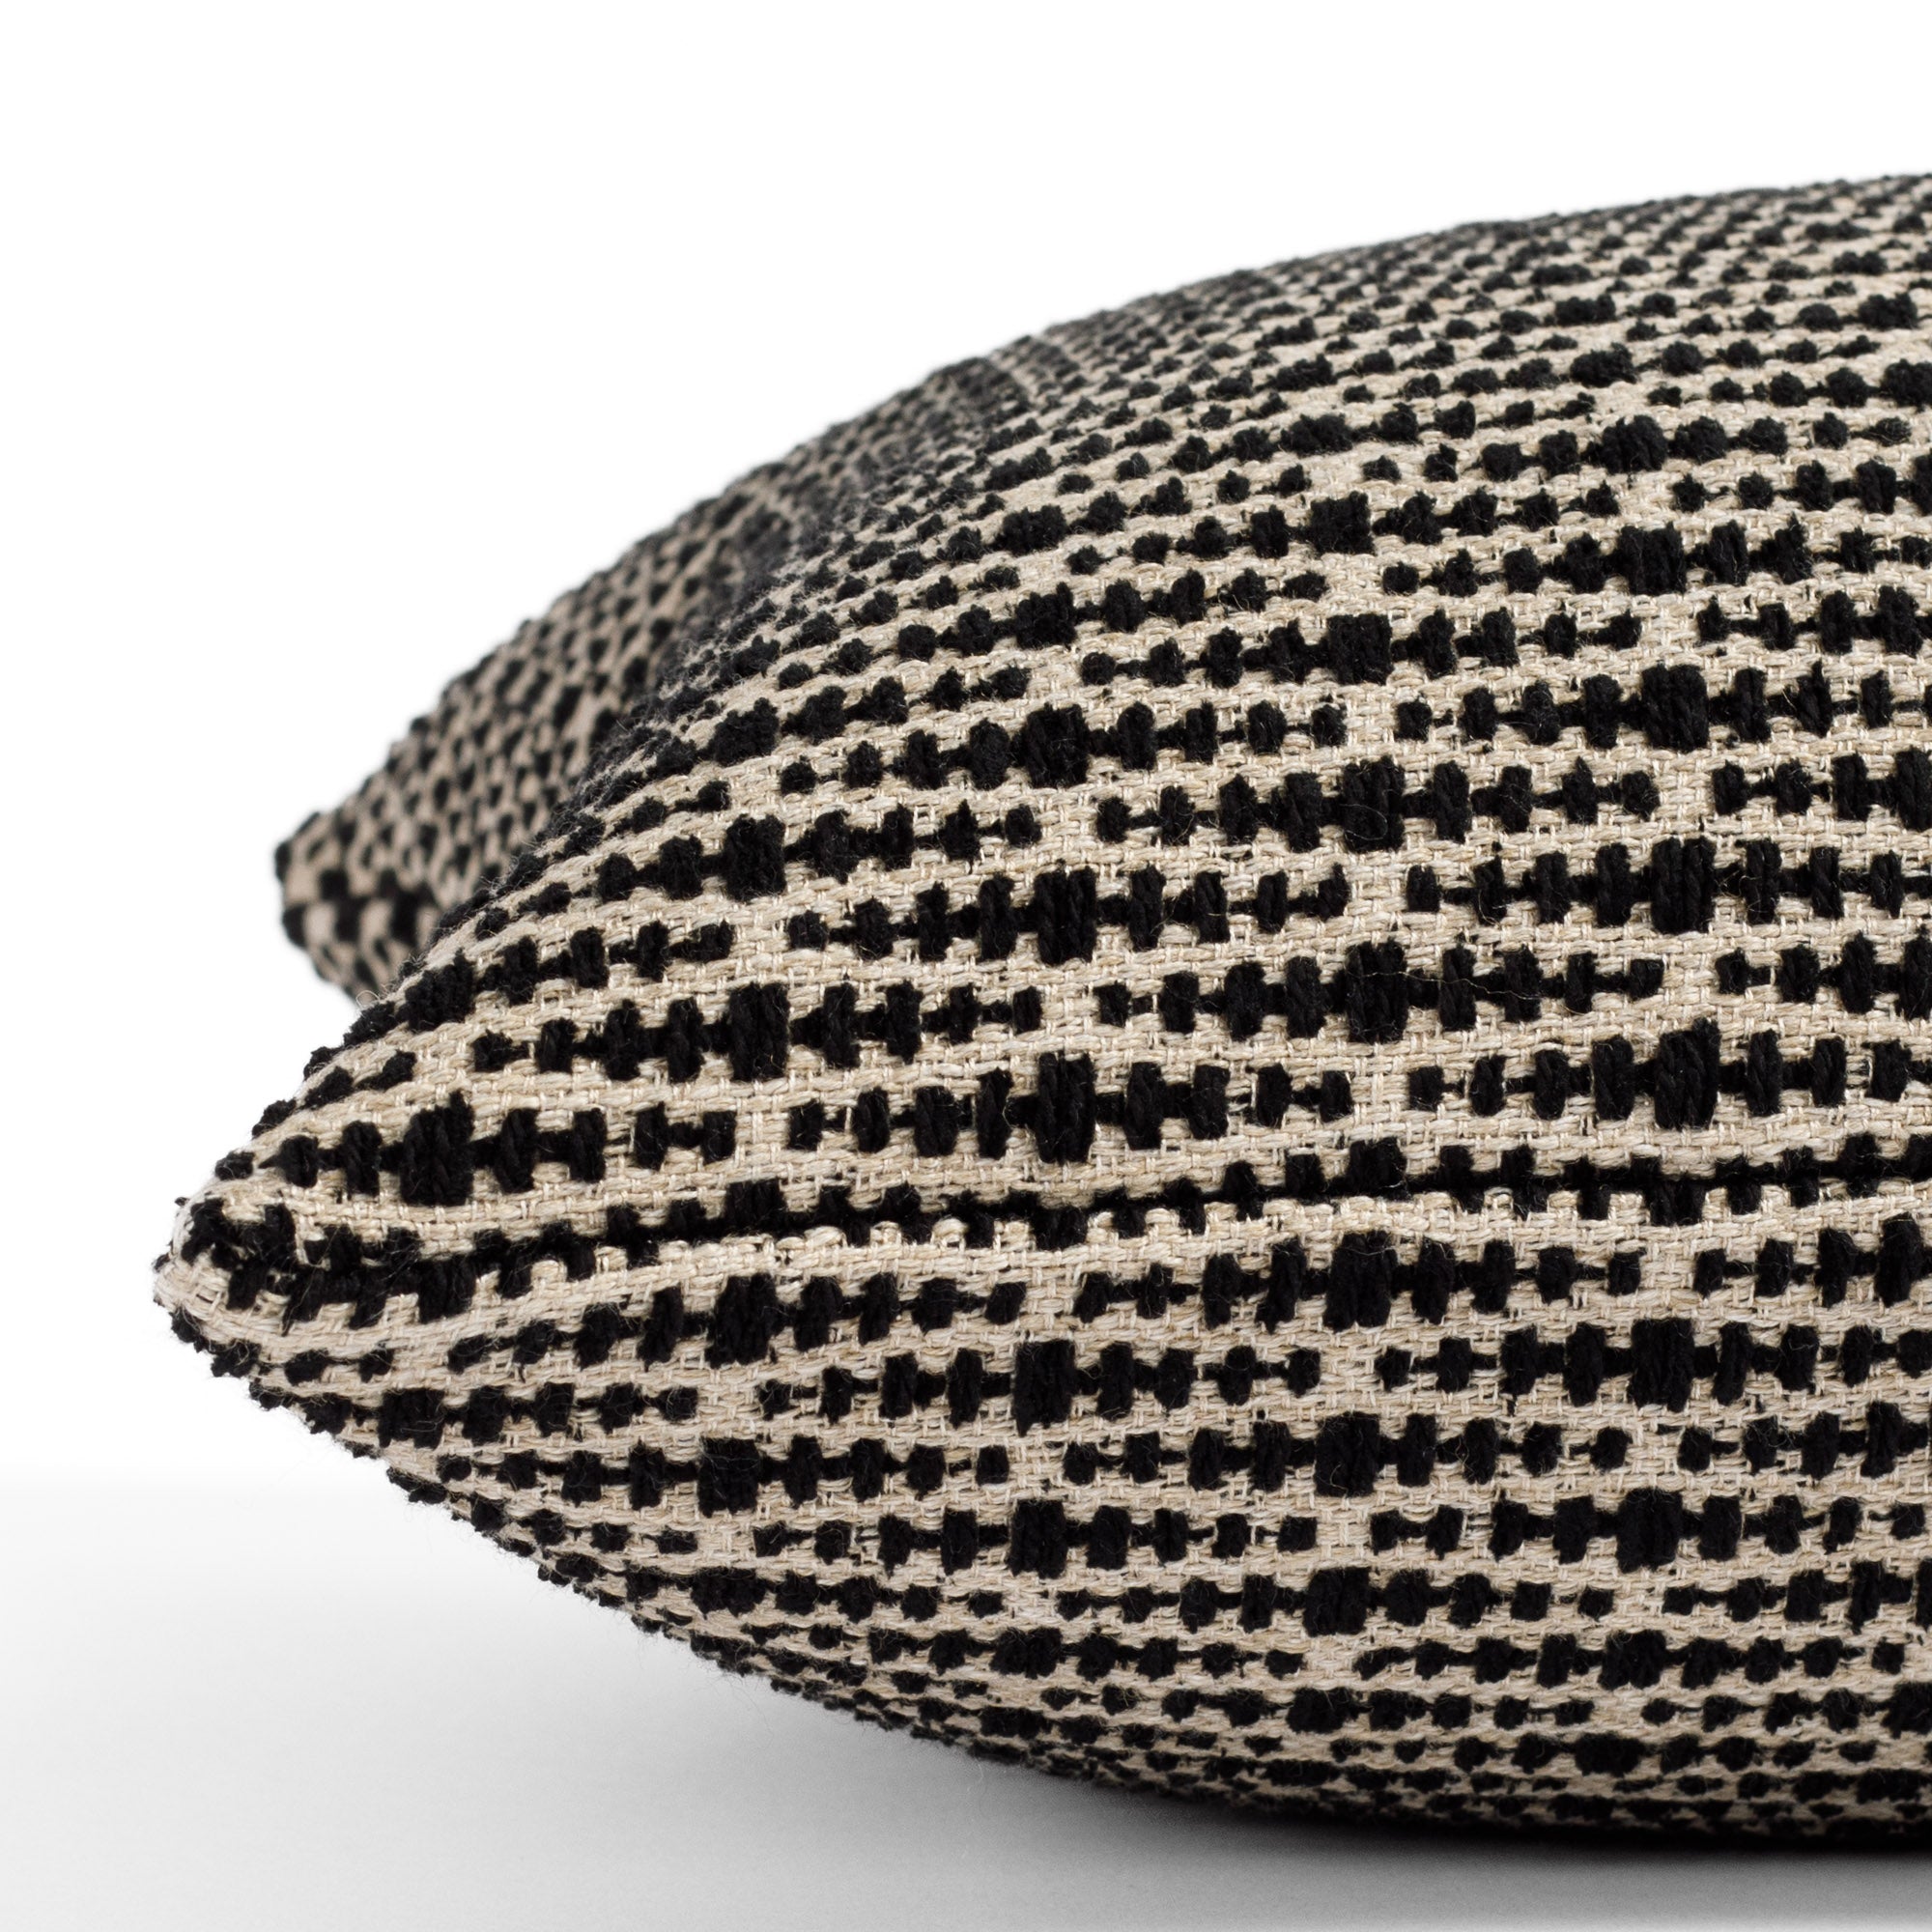 a black and tan geometric patterned lumbar pillow : close up side view